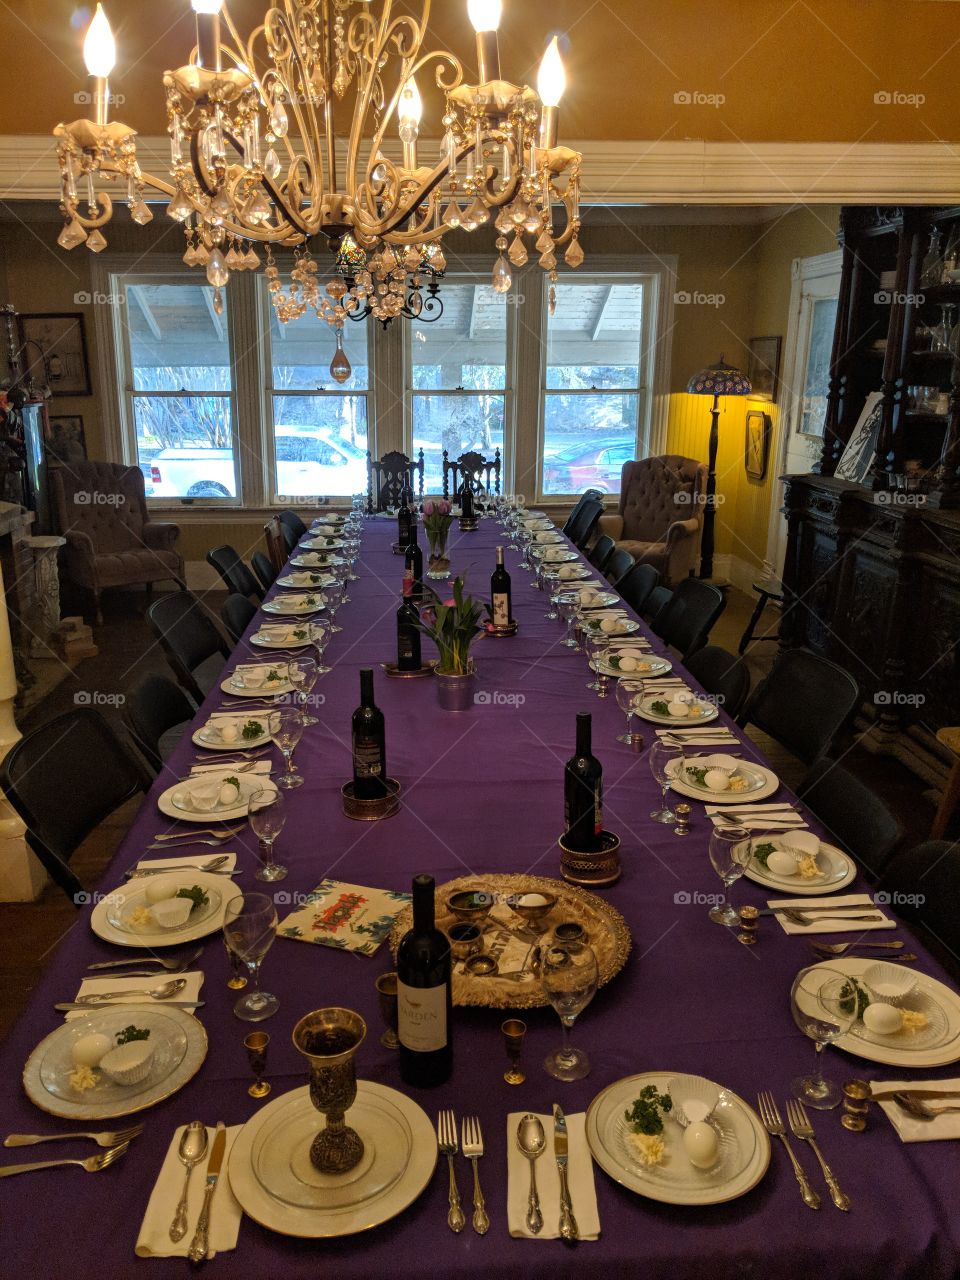 Awaiting for guest to arrive for this beautiful Passover meal